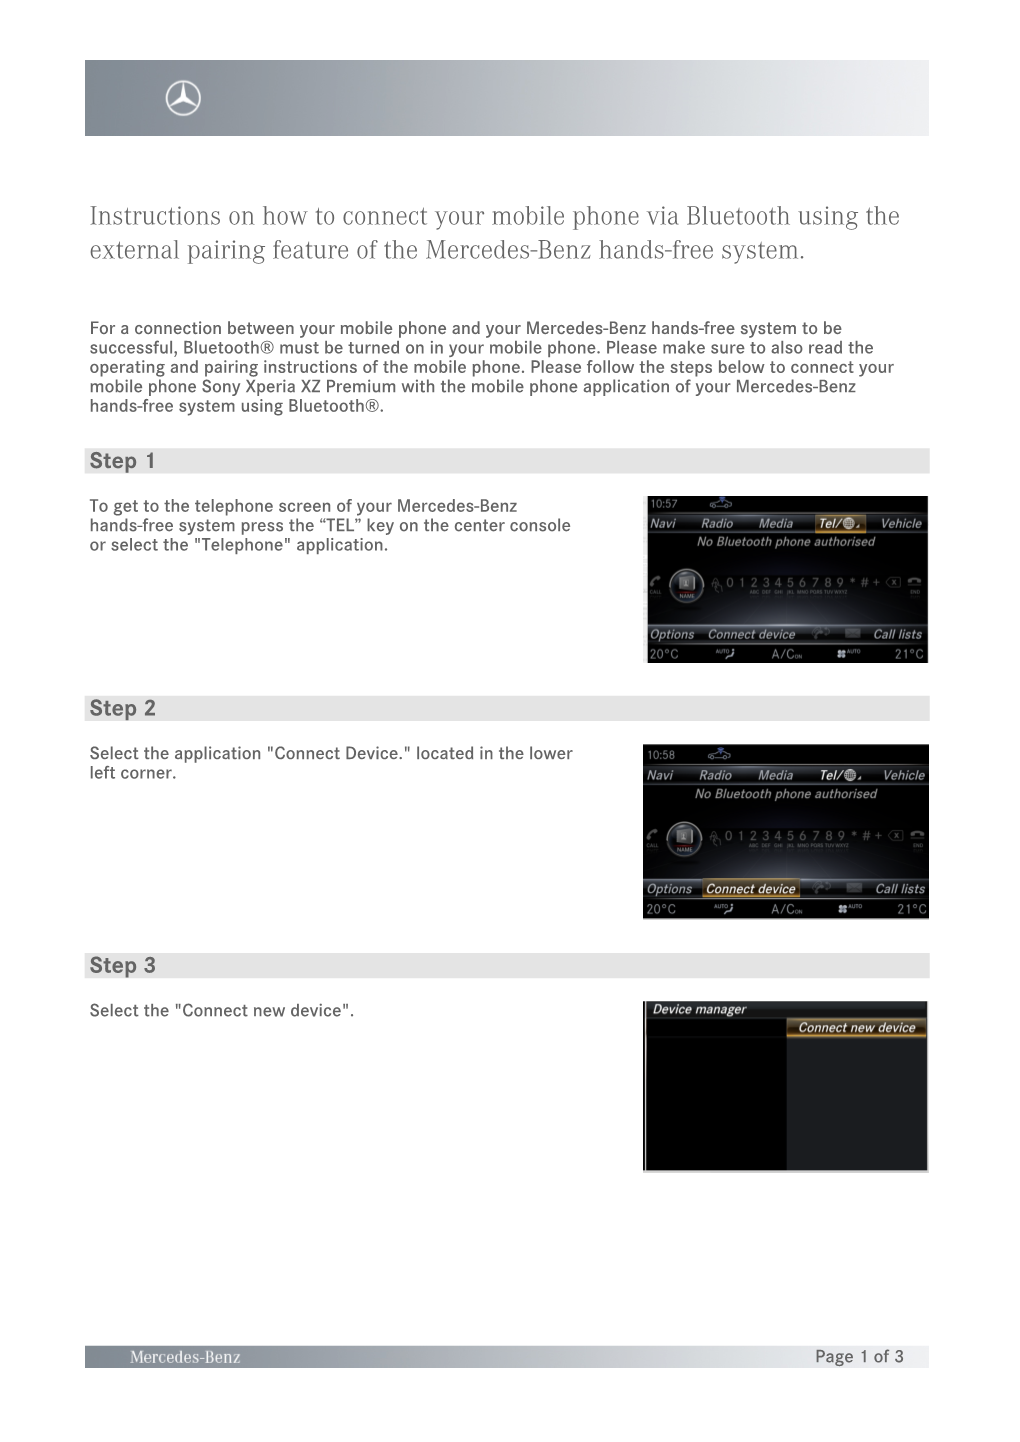 Instructions on How to Connect Your Mobile Phone Via Bluetooth Using the External Pairing Feature of the Mercedes-Benz Hands-Free System